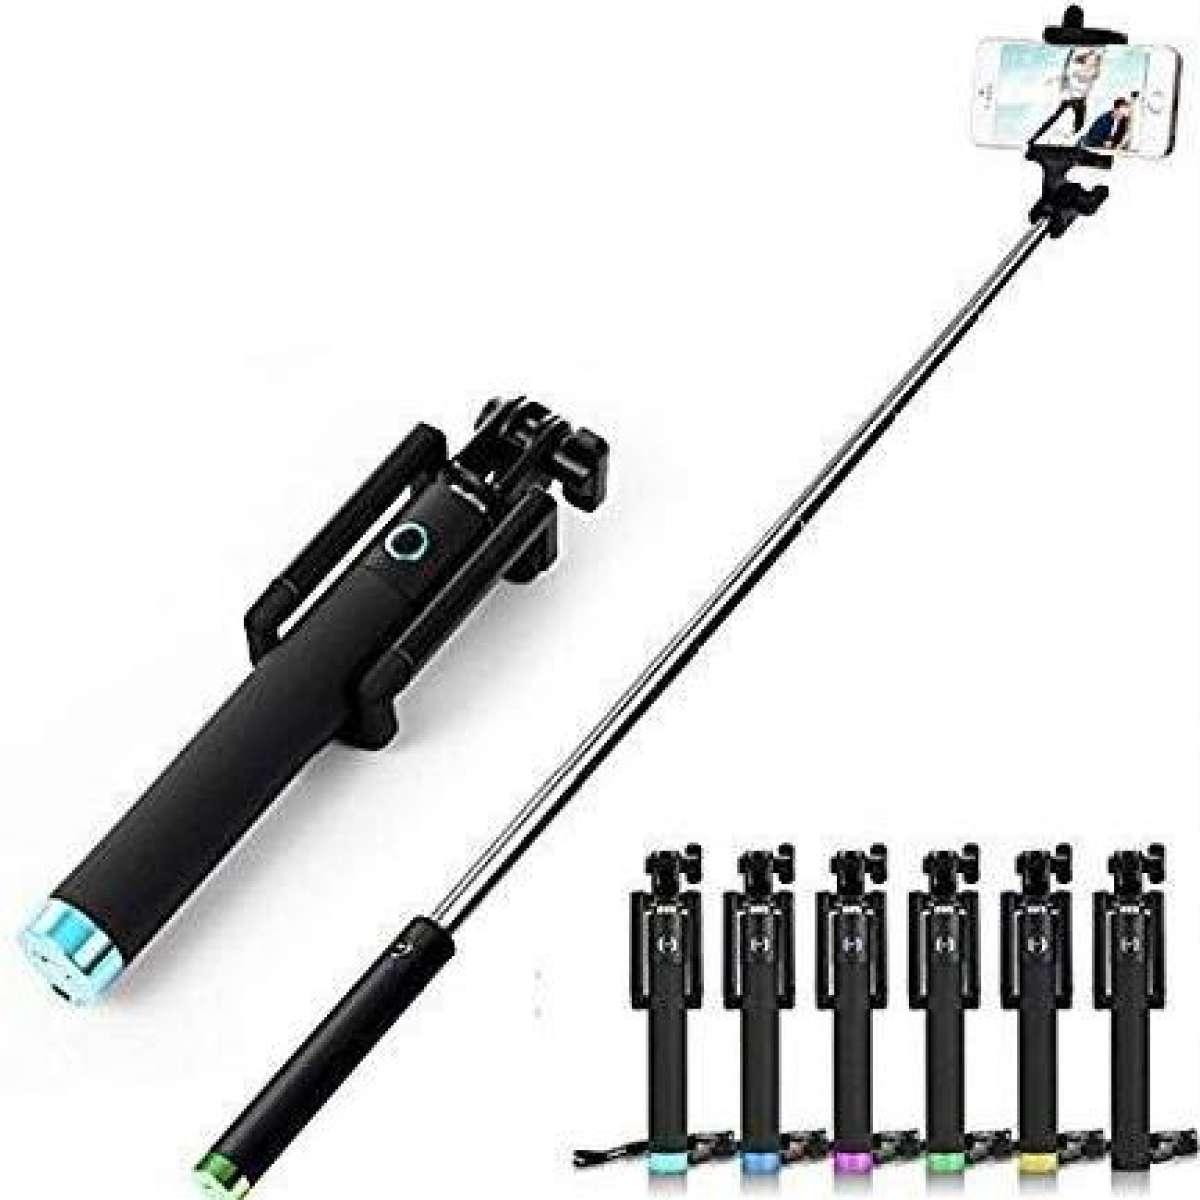 Foldable Monopod With Remote Shutter Monopod By Waroom  mobile Accessories Plaza. 